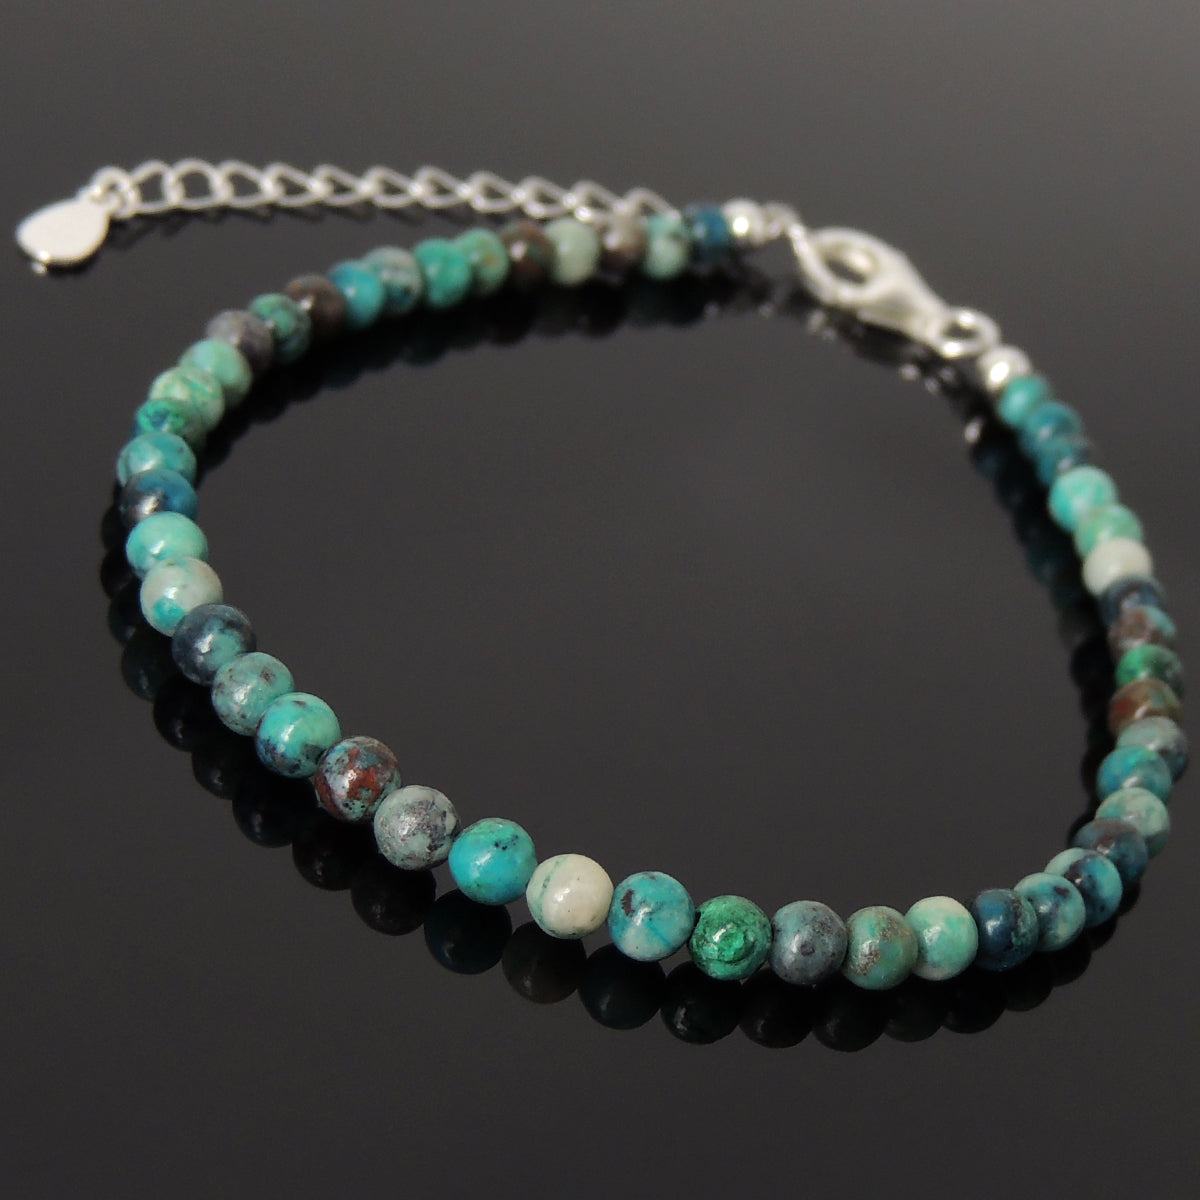 4mm Rare Peru Chrysocolla Healing Gemstone Bracelet with S925 Sterling Silver Chain & Clasp - Handmade by Gem & Silver BR1251